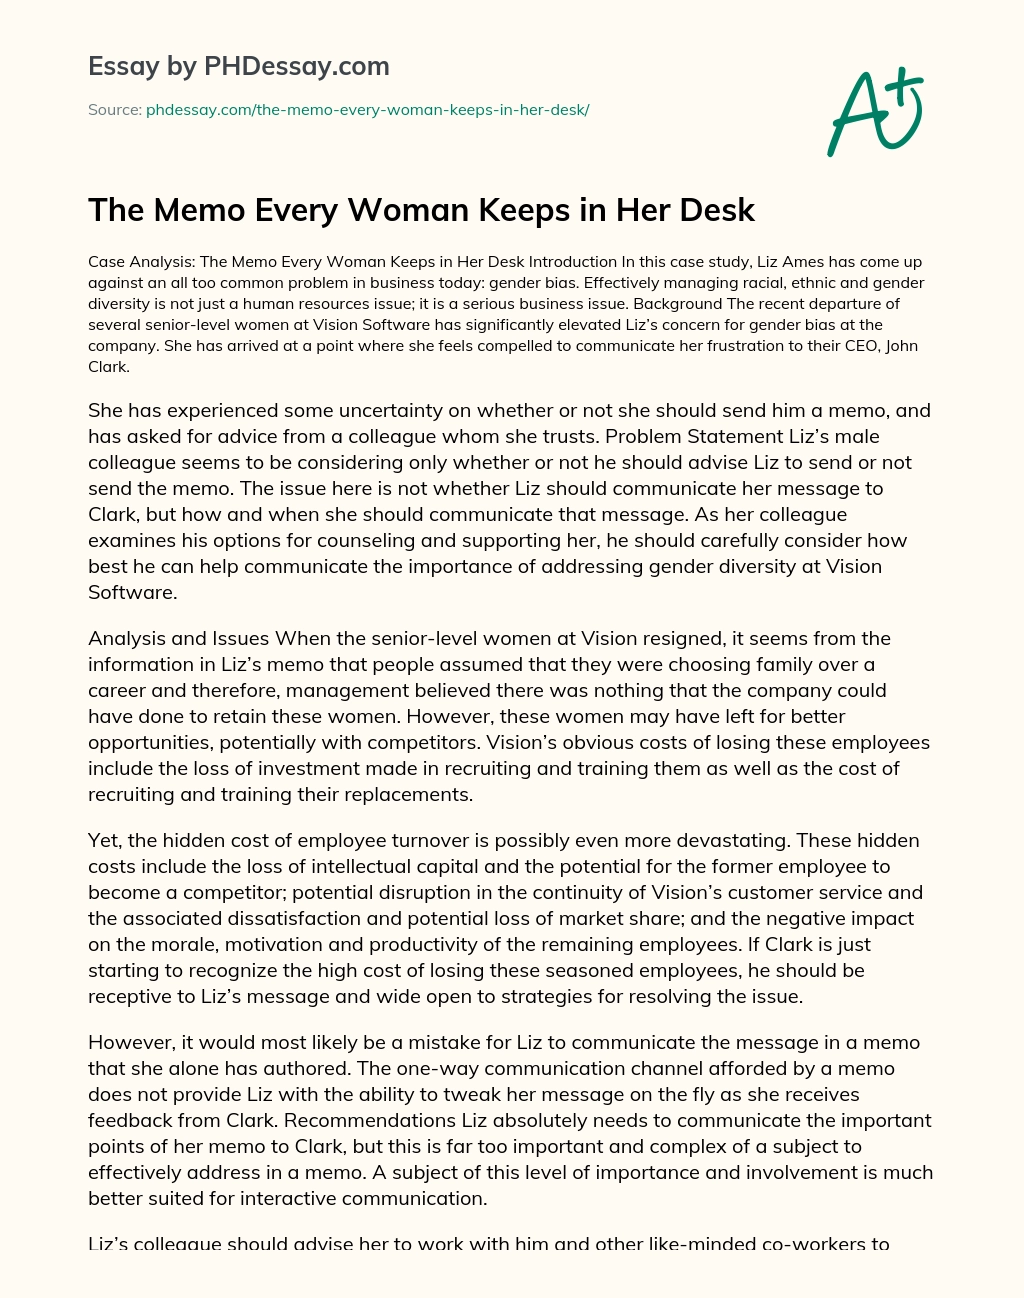 The Memo Every Woman Keeps in Her Desk essay